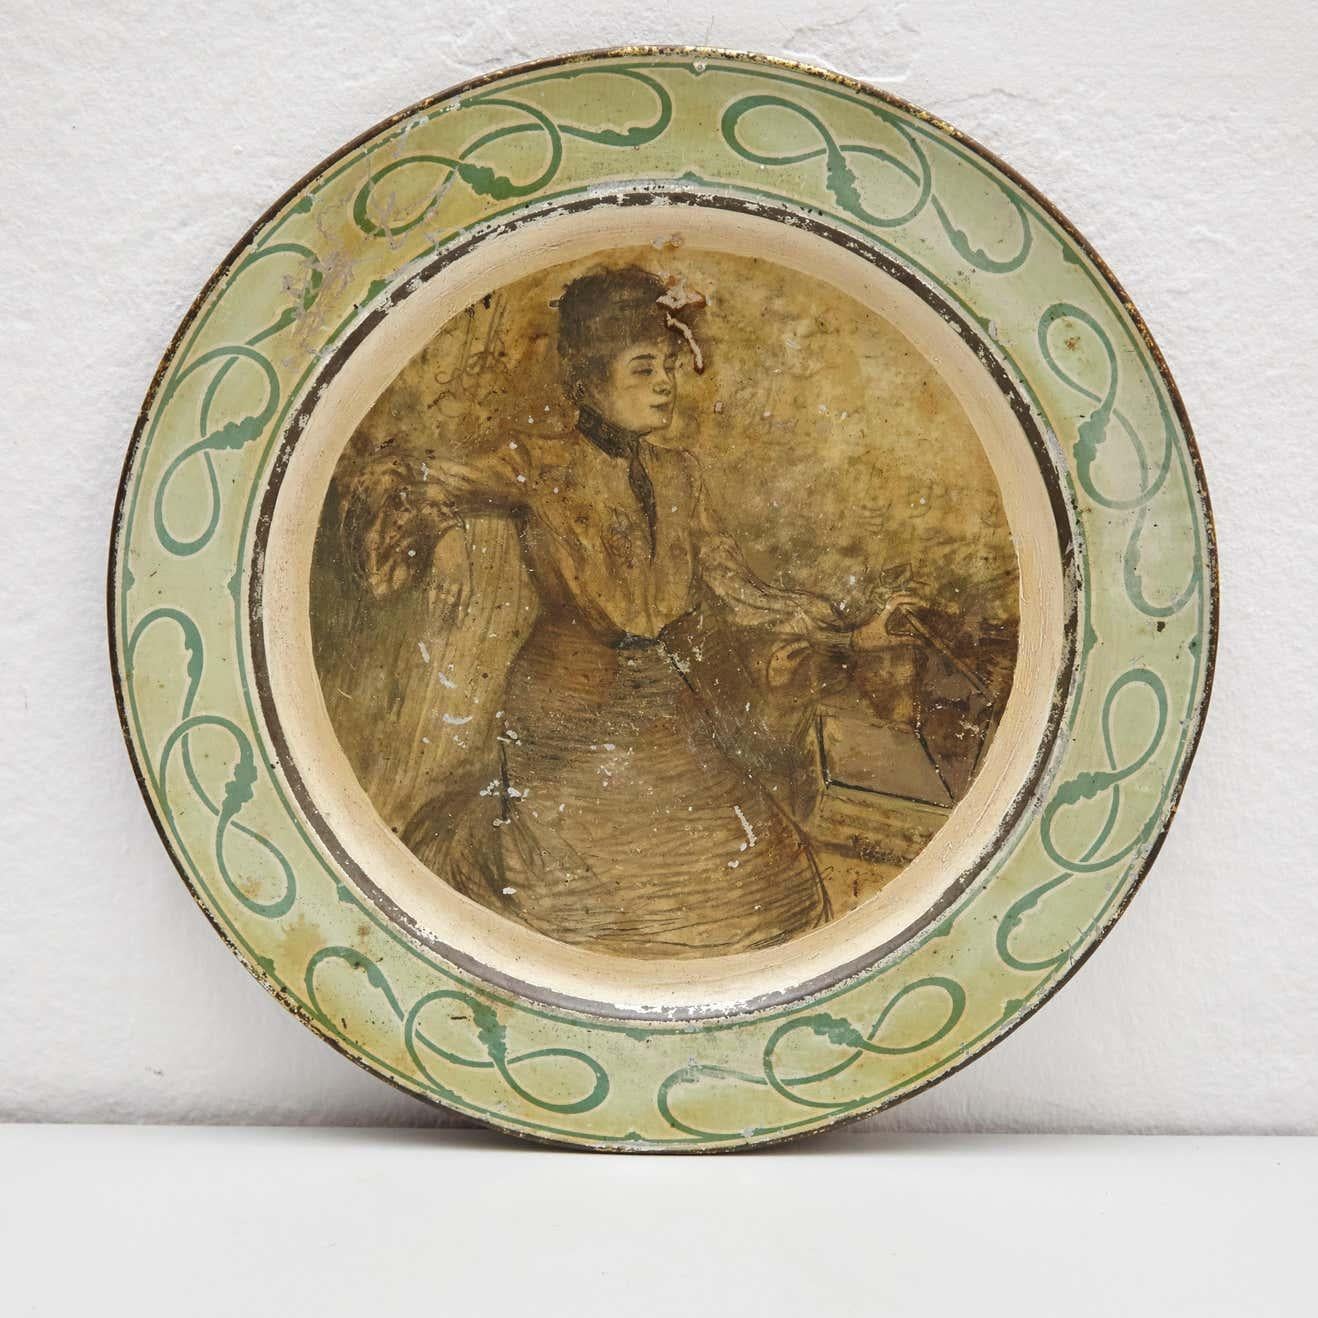 19th century metal plate, Art Nouveau style.
By unknown manufacturer, Spain.
In original condition, with minor wear consistent of age and use, preserving a beautiful patina.

Materials:
Metal

Dimensions:
ø 38 cm x 2 cm.